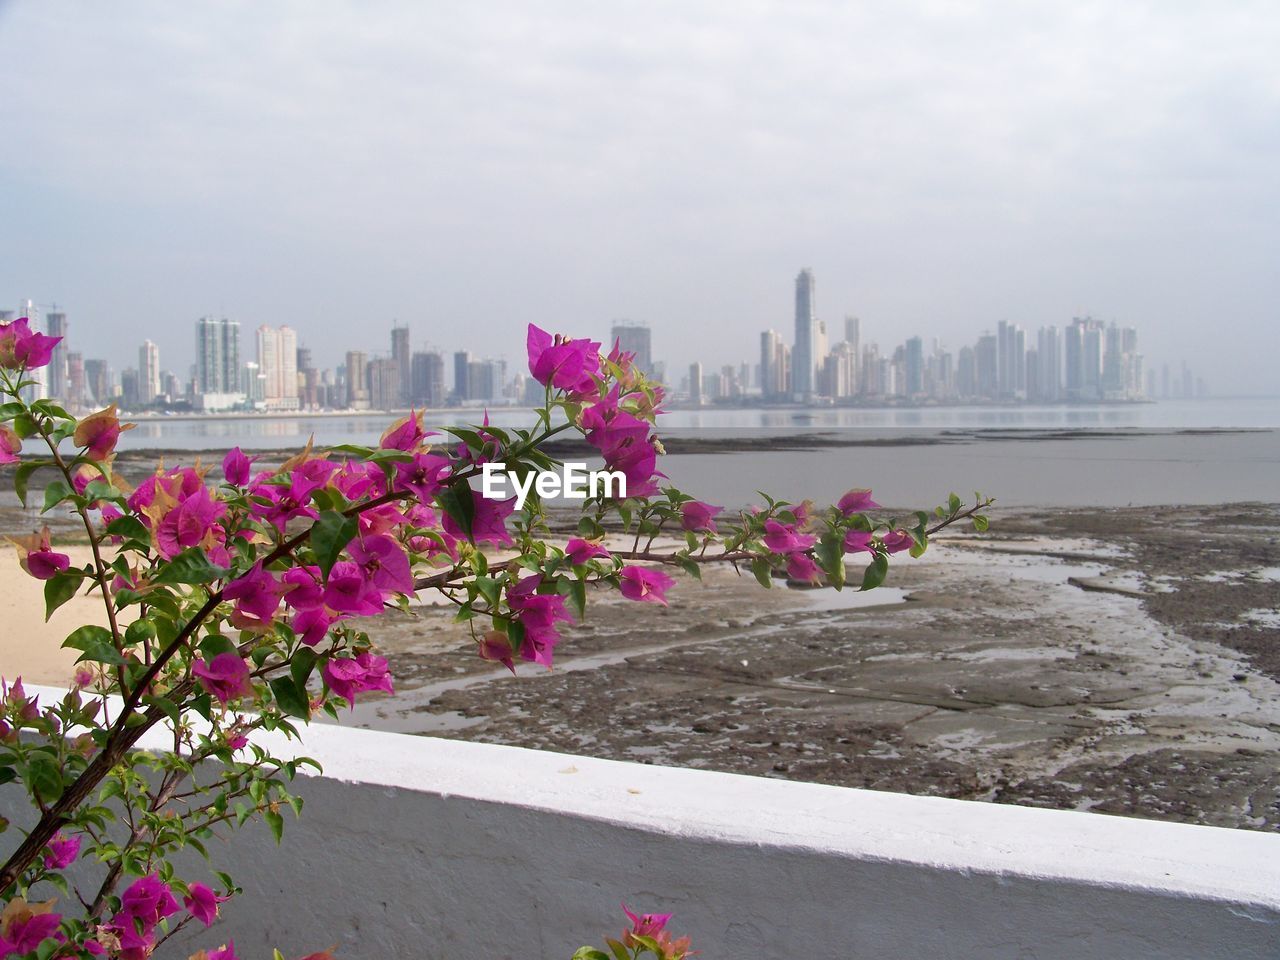 Pink flowers with river and city skyline in background